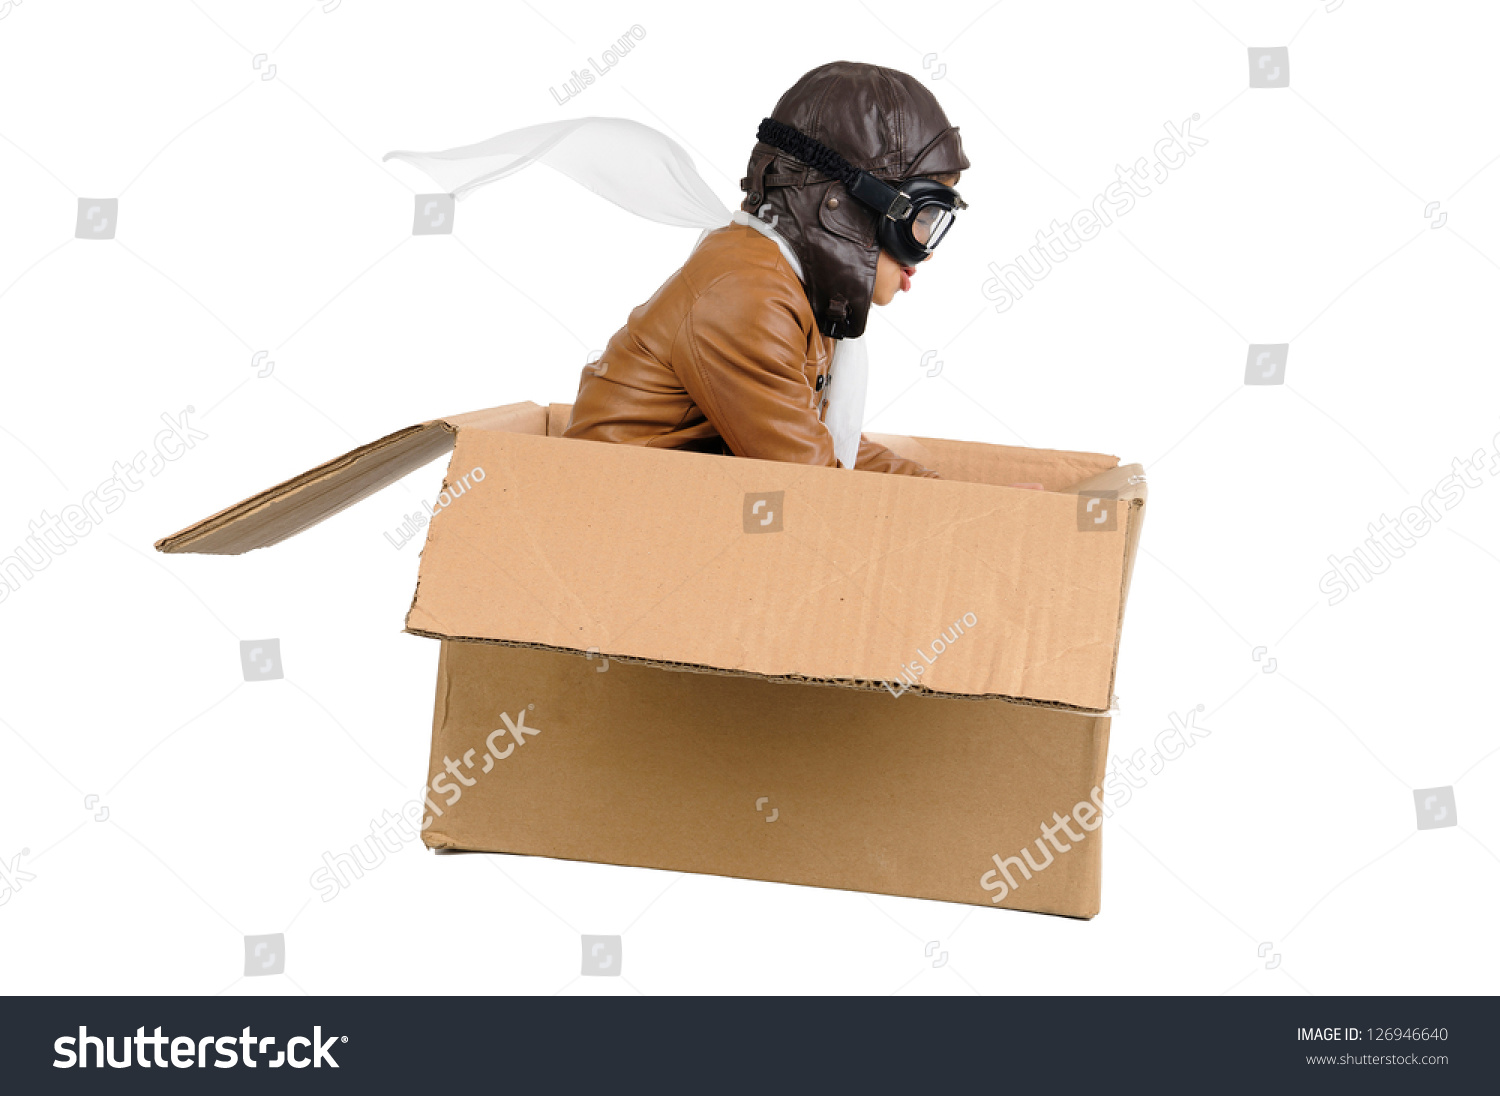 Young boy pilot flying a cardboard box isolated in white #126946640